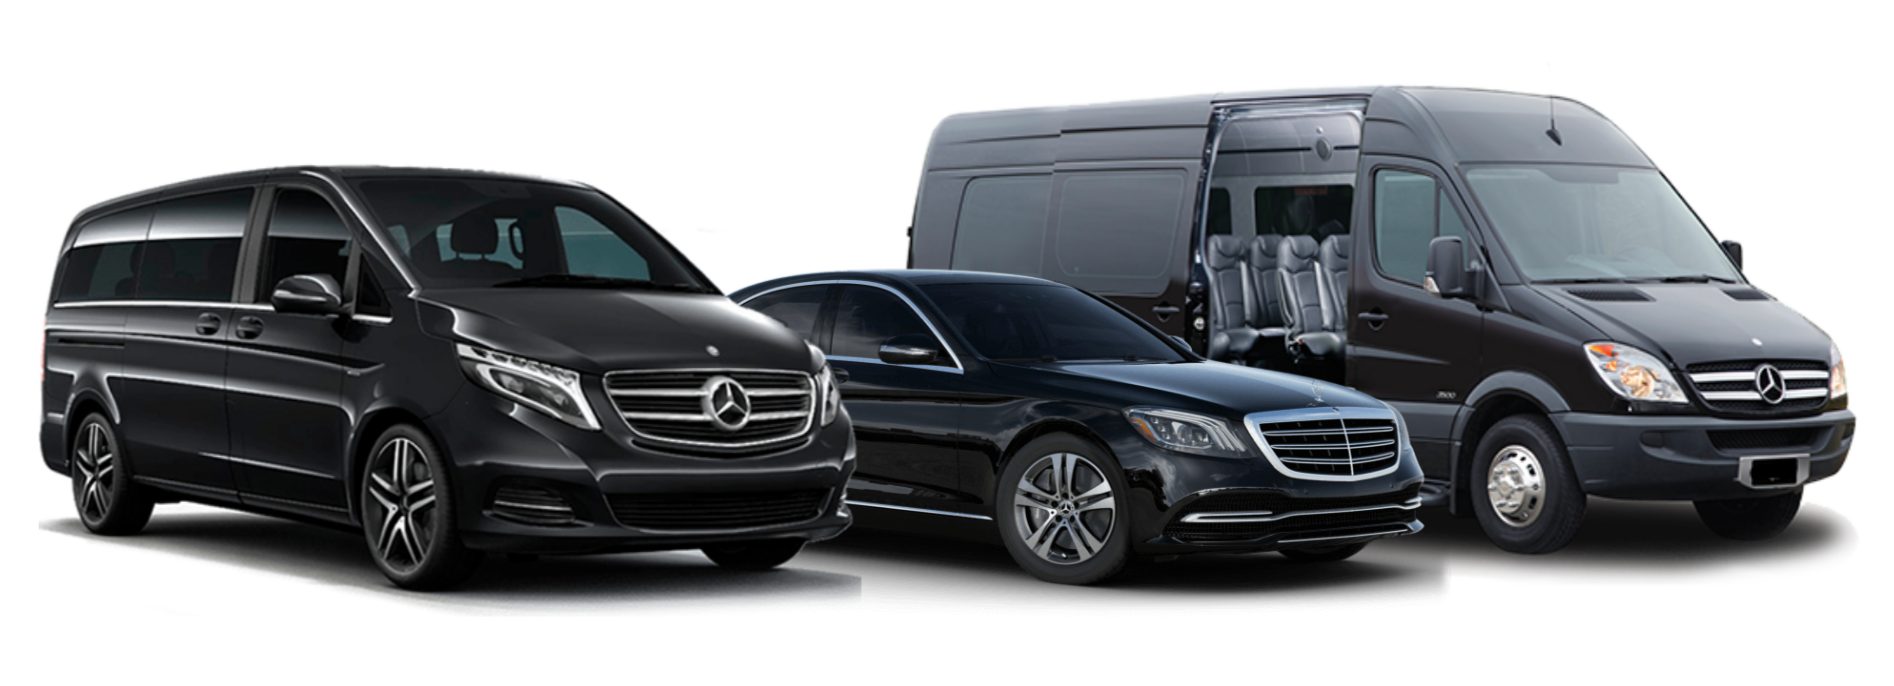 fleet with car, limousine, van and minibus for ski taxi service and airport transfer from zurich to st. moritz